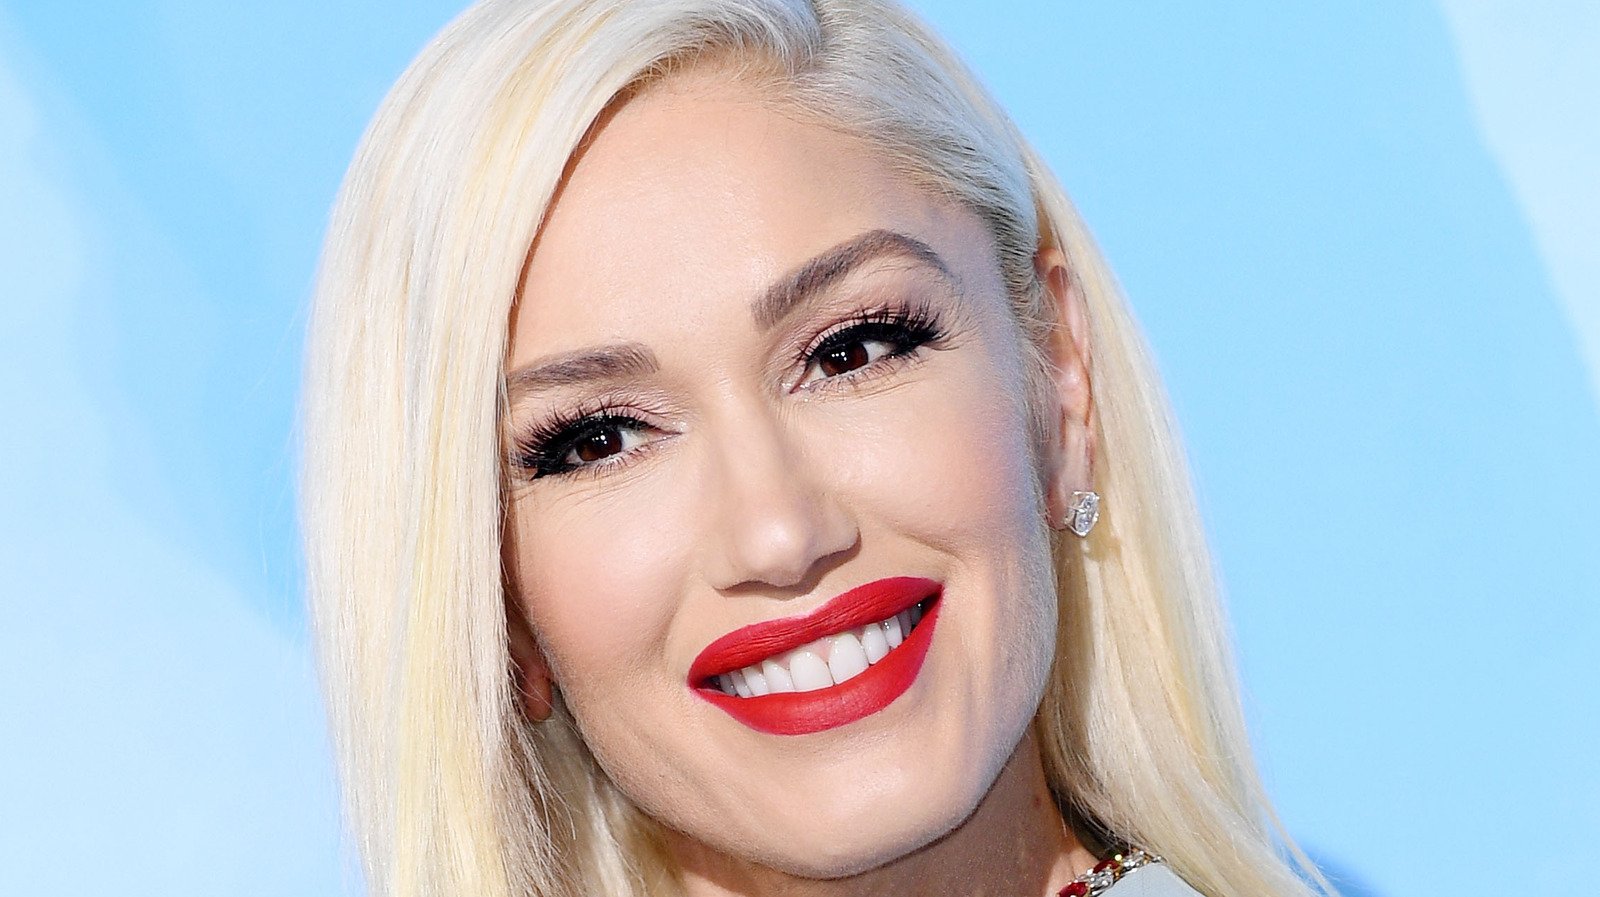 Gwen Stefani Just Revealed This About Her Looks